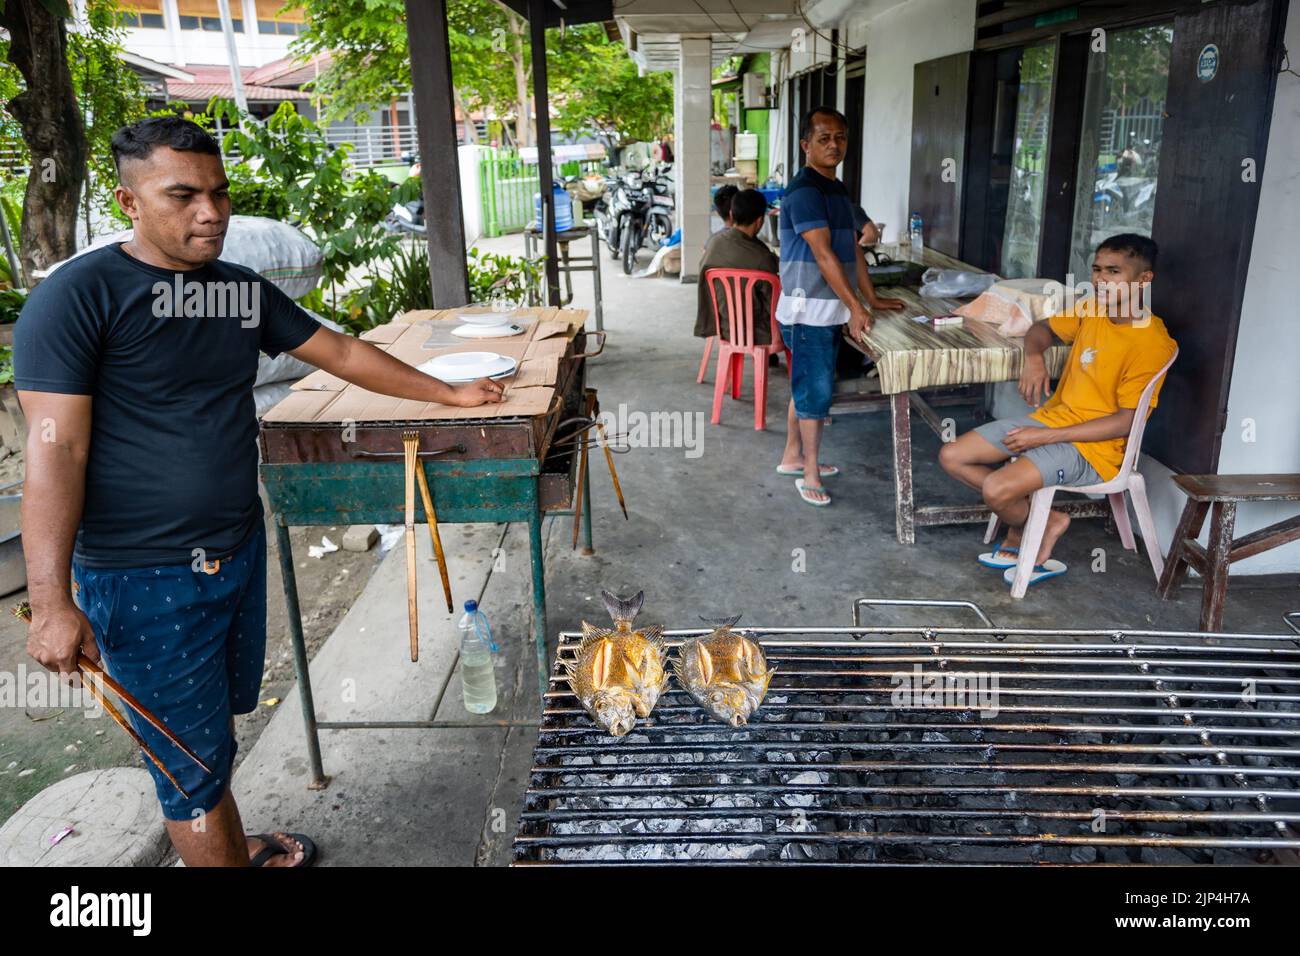 A local man grill fish on a charcoal grill in a restaurant. Sulawesi, Indonesia. Stock Photo